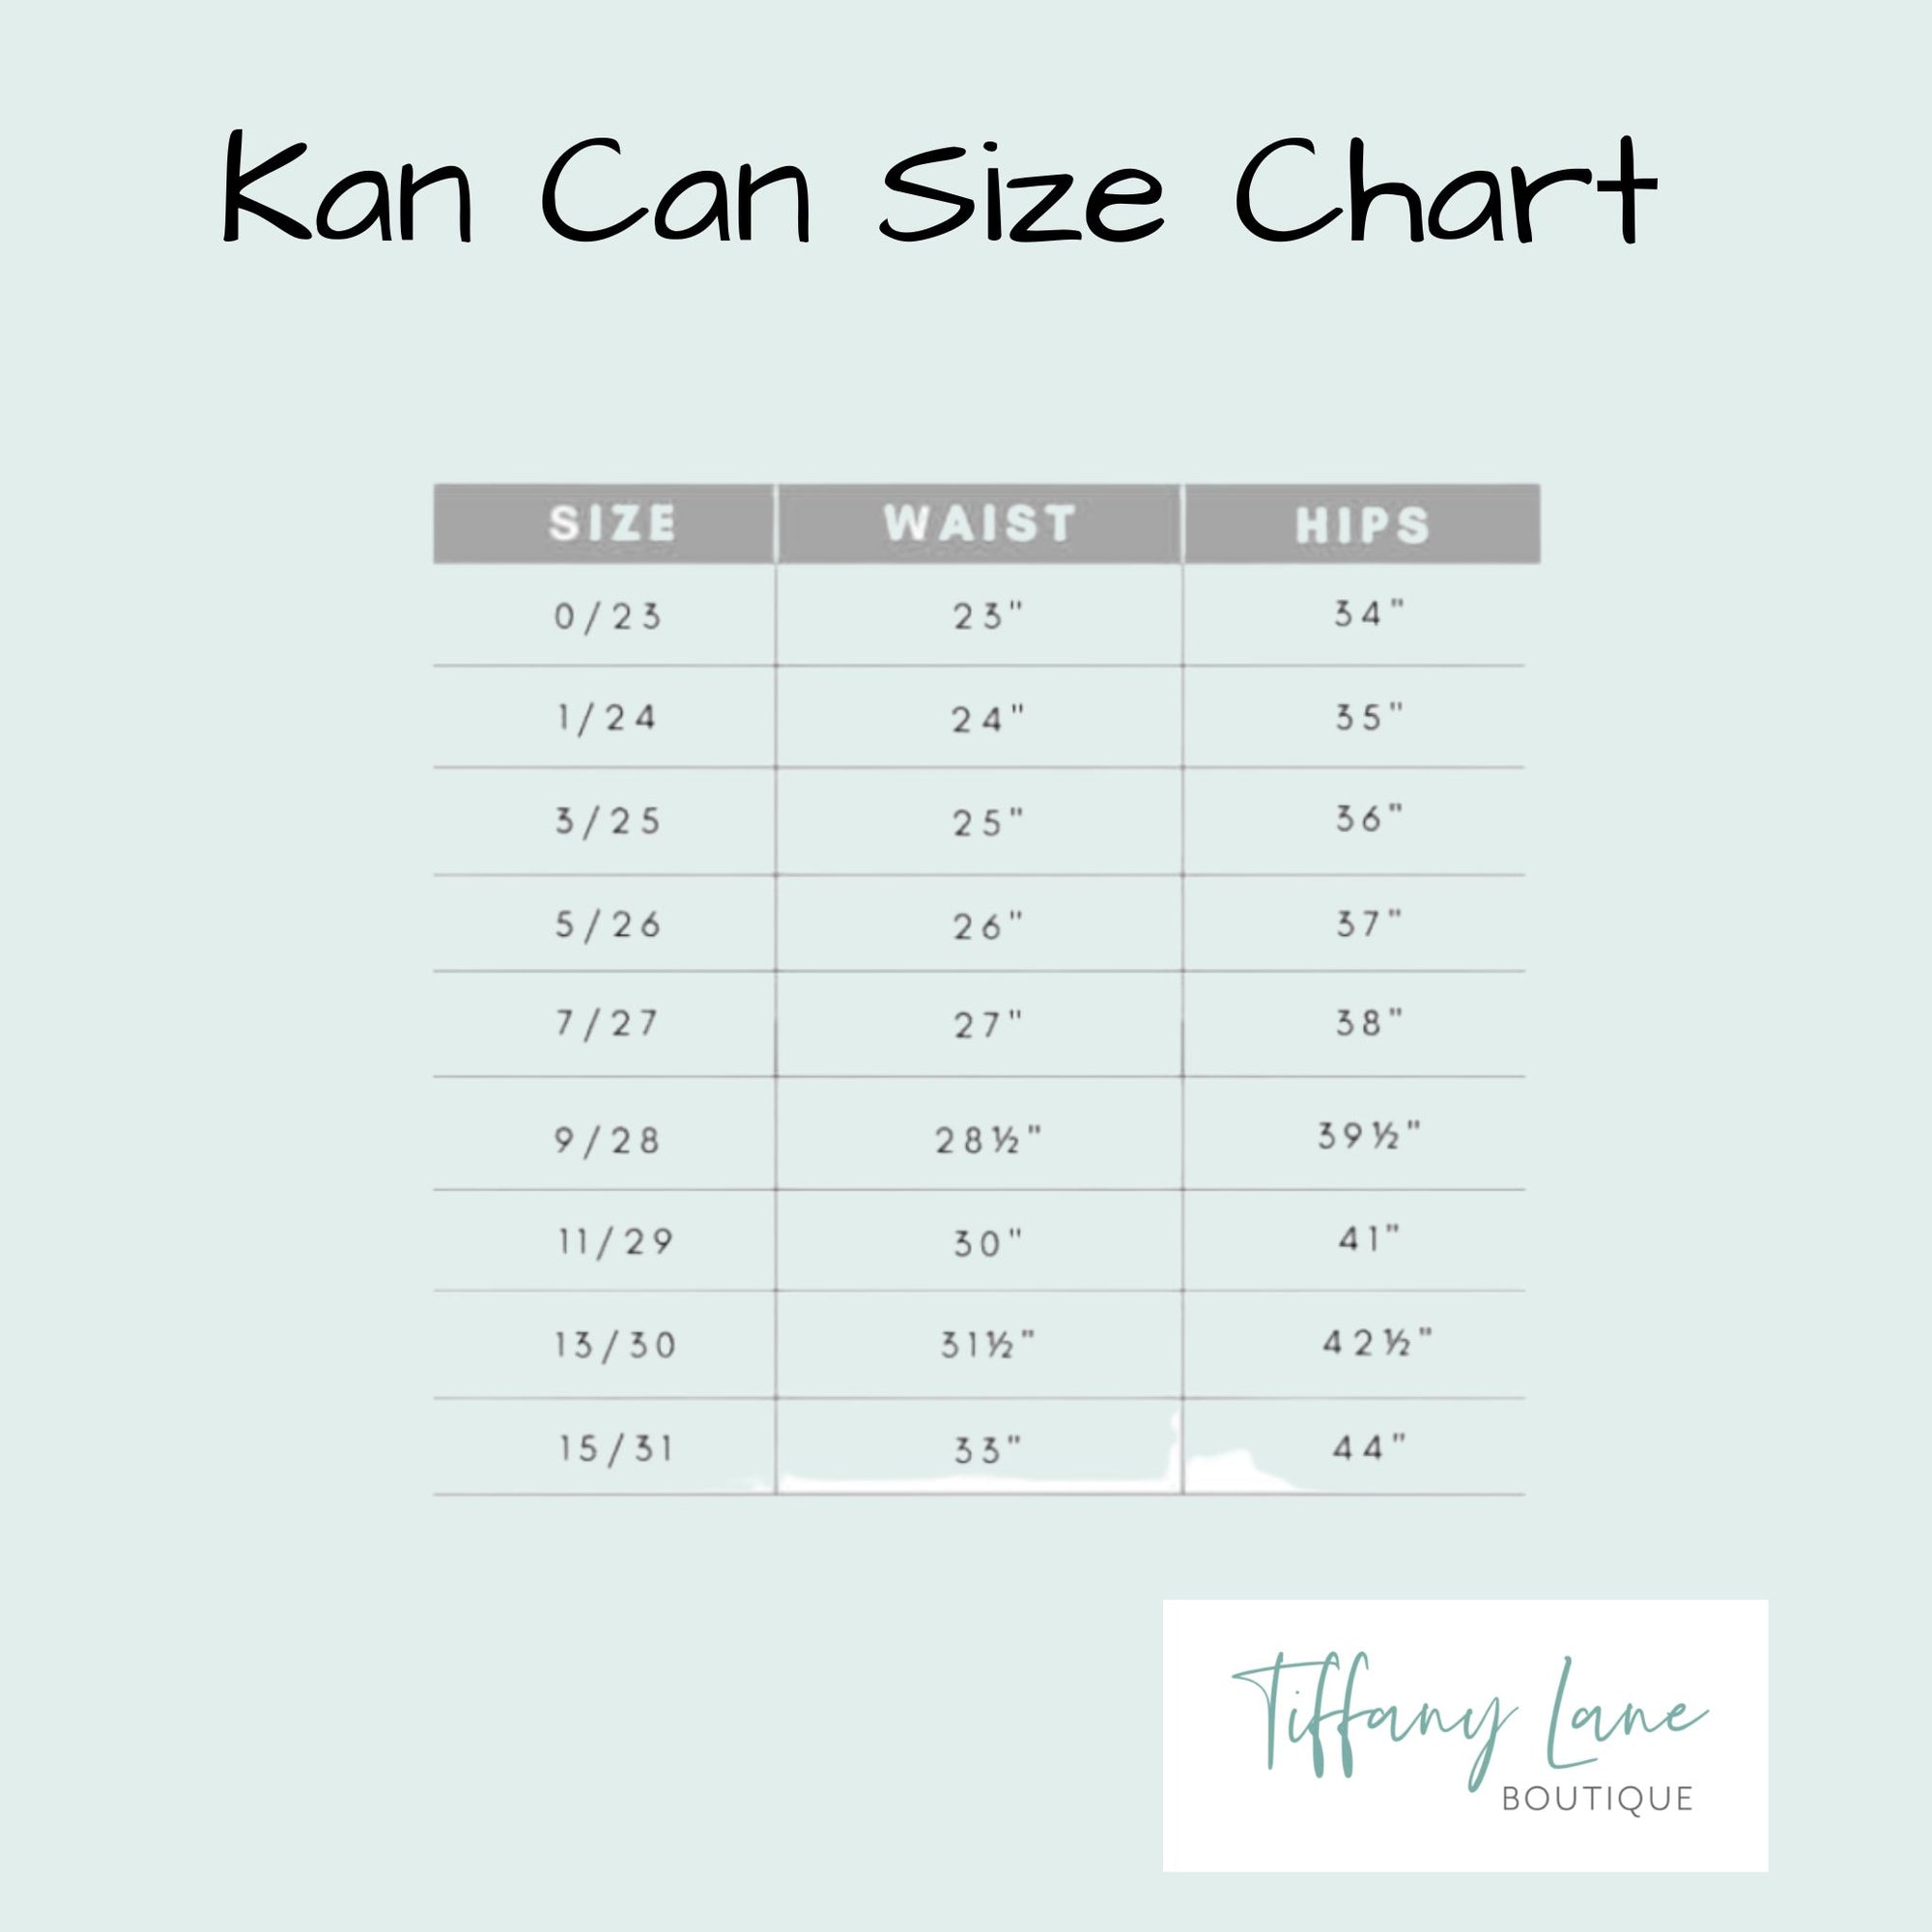 Kan Can- Meet You There Wide Leg Jeans